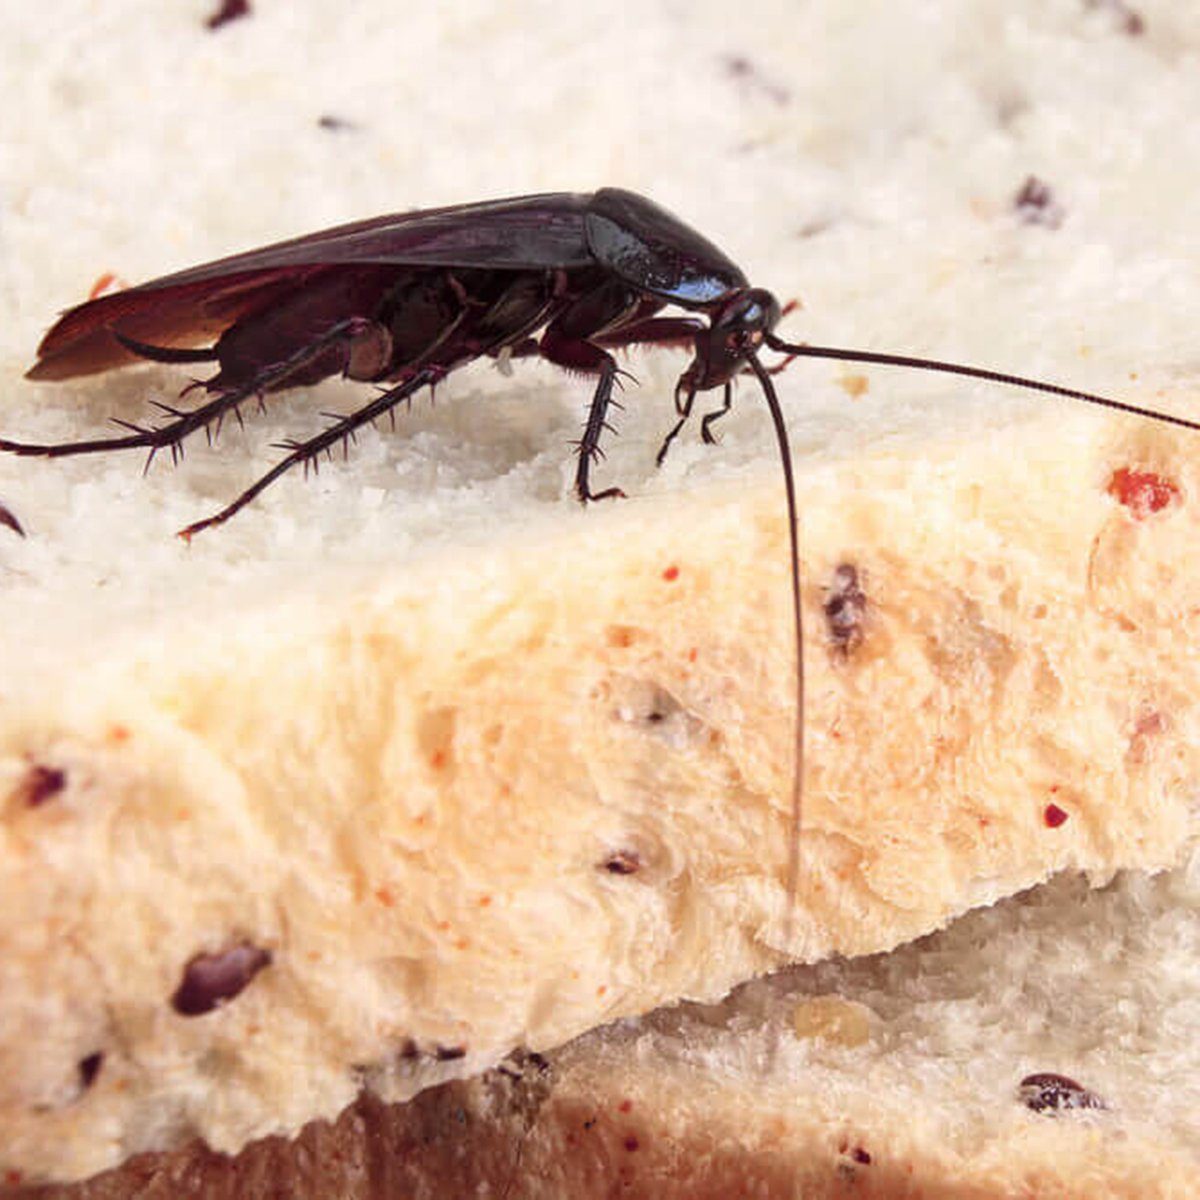 Brown Cockroach on a Piece of Bread